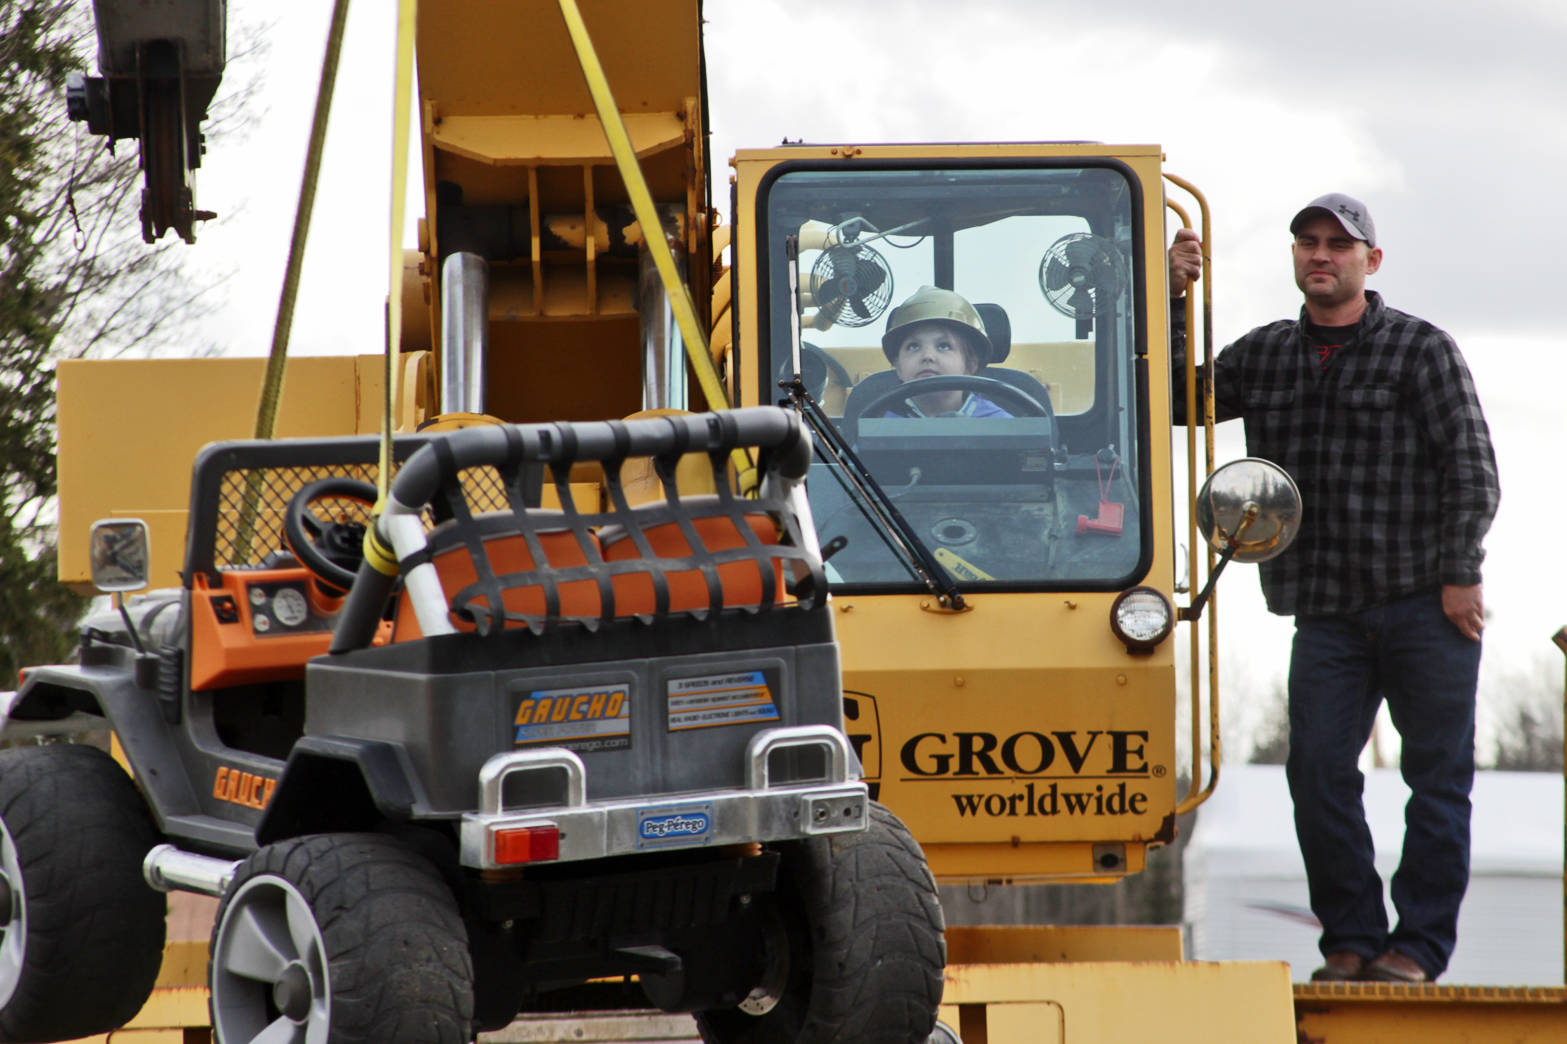 Madison Hibpshman (left) uses a crane to lift a toy electric jeep, watched by Mike Elmore, during her class’s field trip to Alaska Crane Consultants on Monday, May 7, 2018 on Kalifornsky Beach road. (Ben Boettger/Peninsula Clarion)